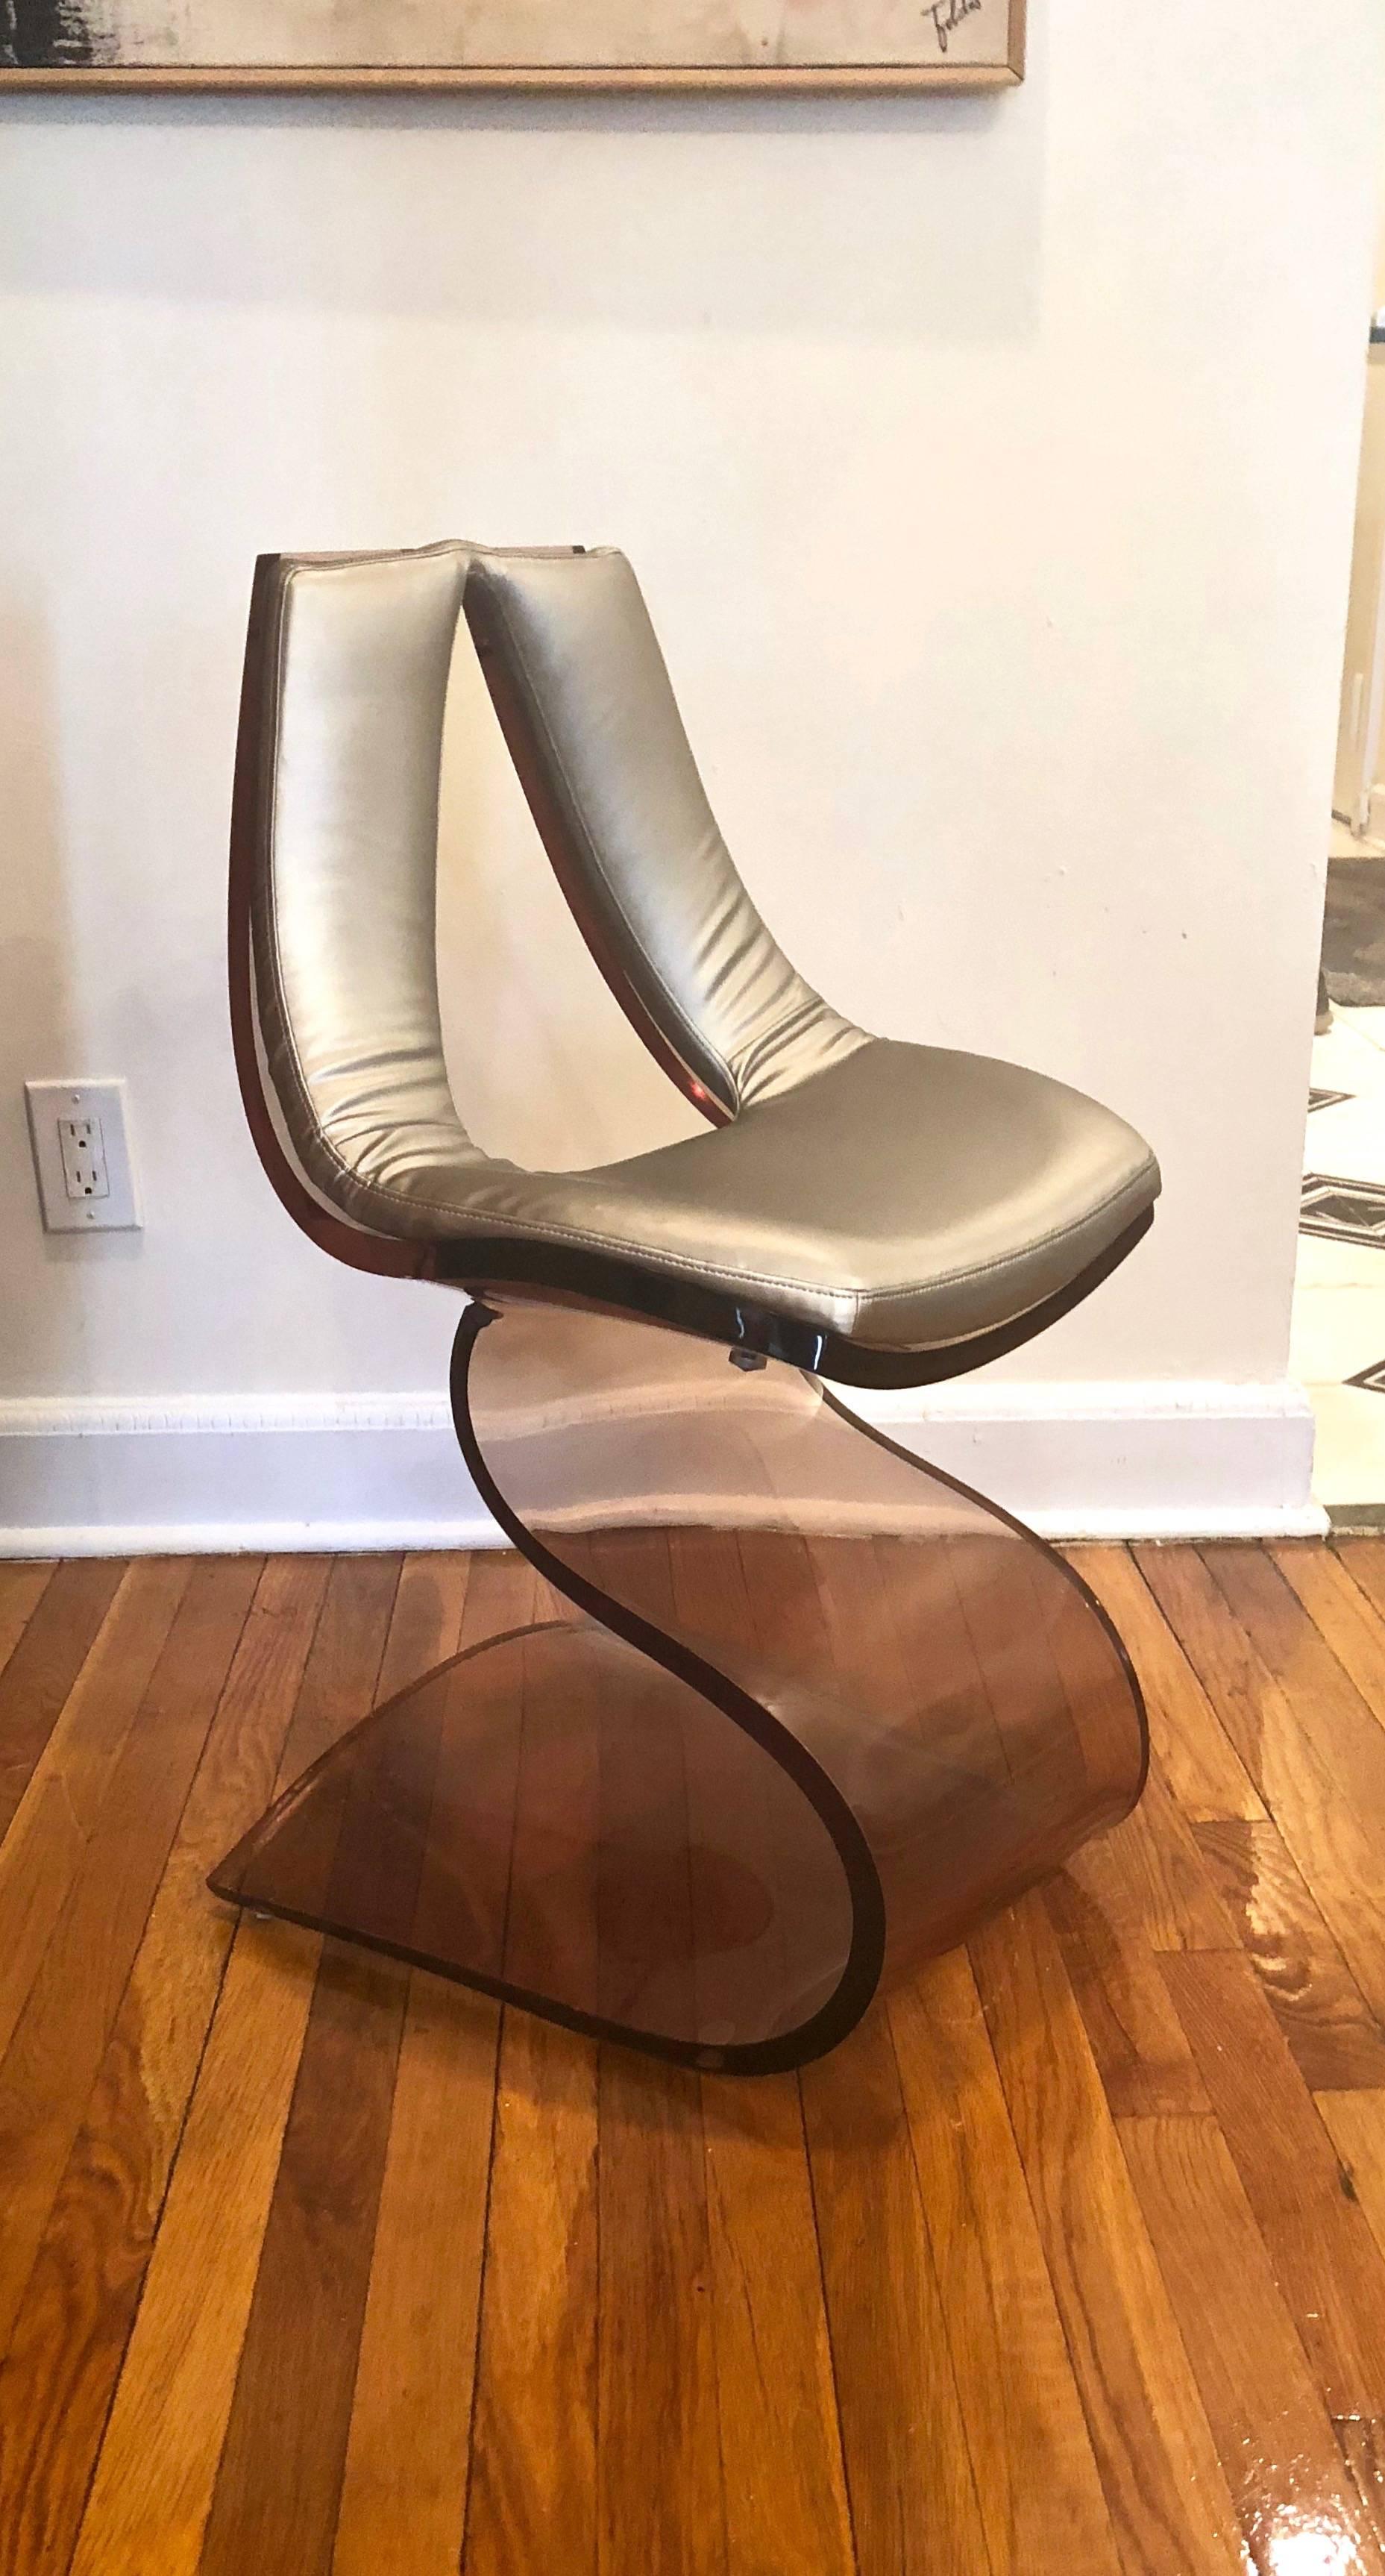 Acrylic Desk and Chair in Opaque and Smoked Lucite by Rena Dumas made in France 1971